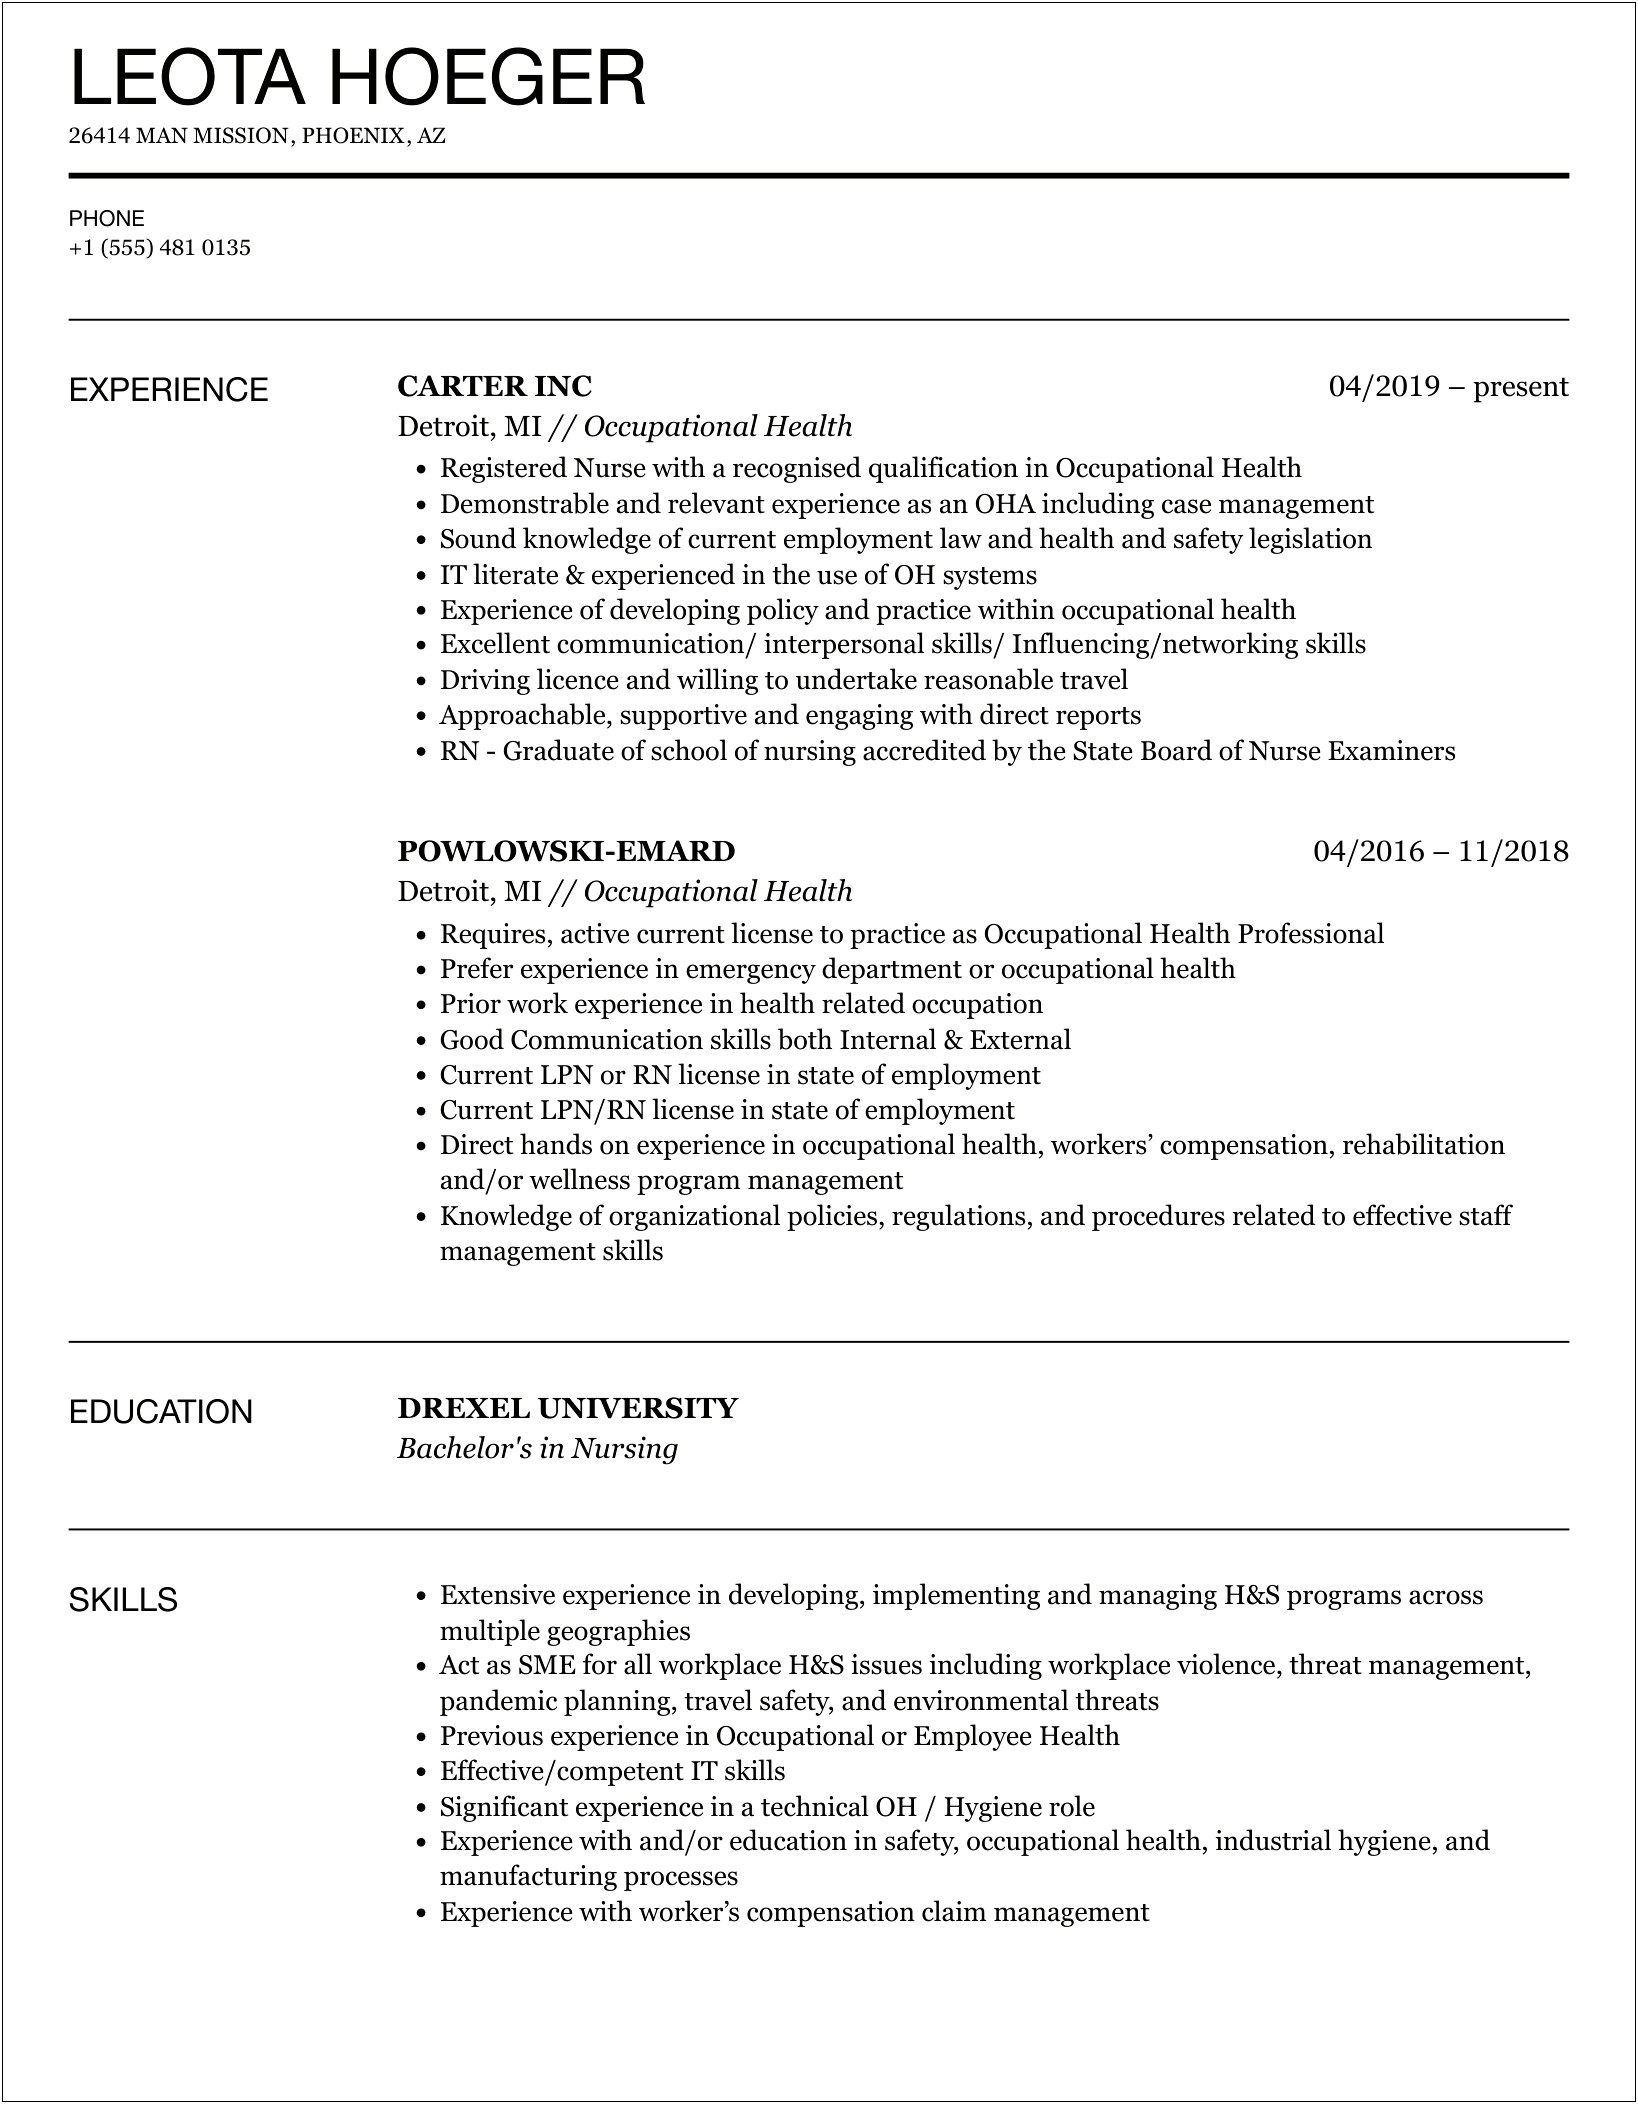 Temple Resume Occupational Health And Safety Managment